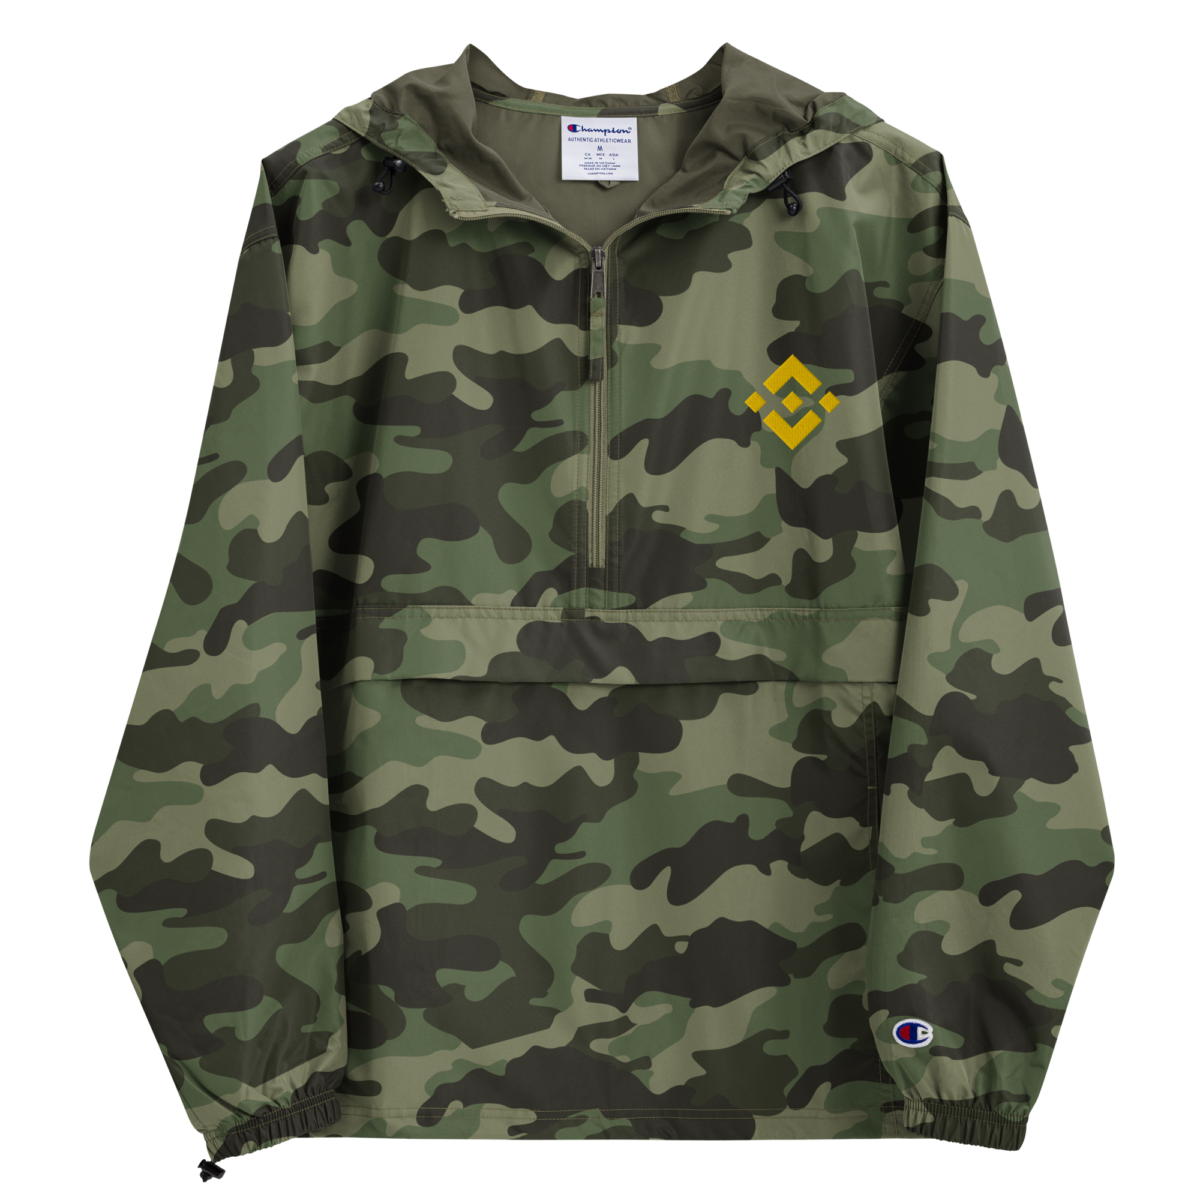 embroidered champion packable jacket olive green camo front 631f401a84f02 - Binance (BNB) Champion Packable Jacket